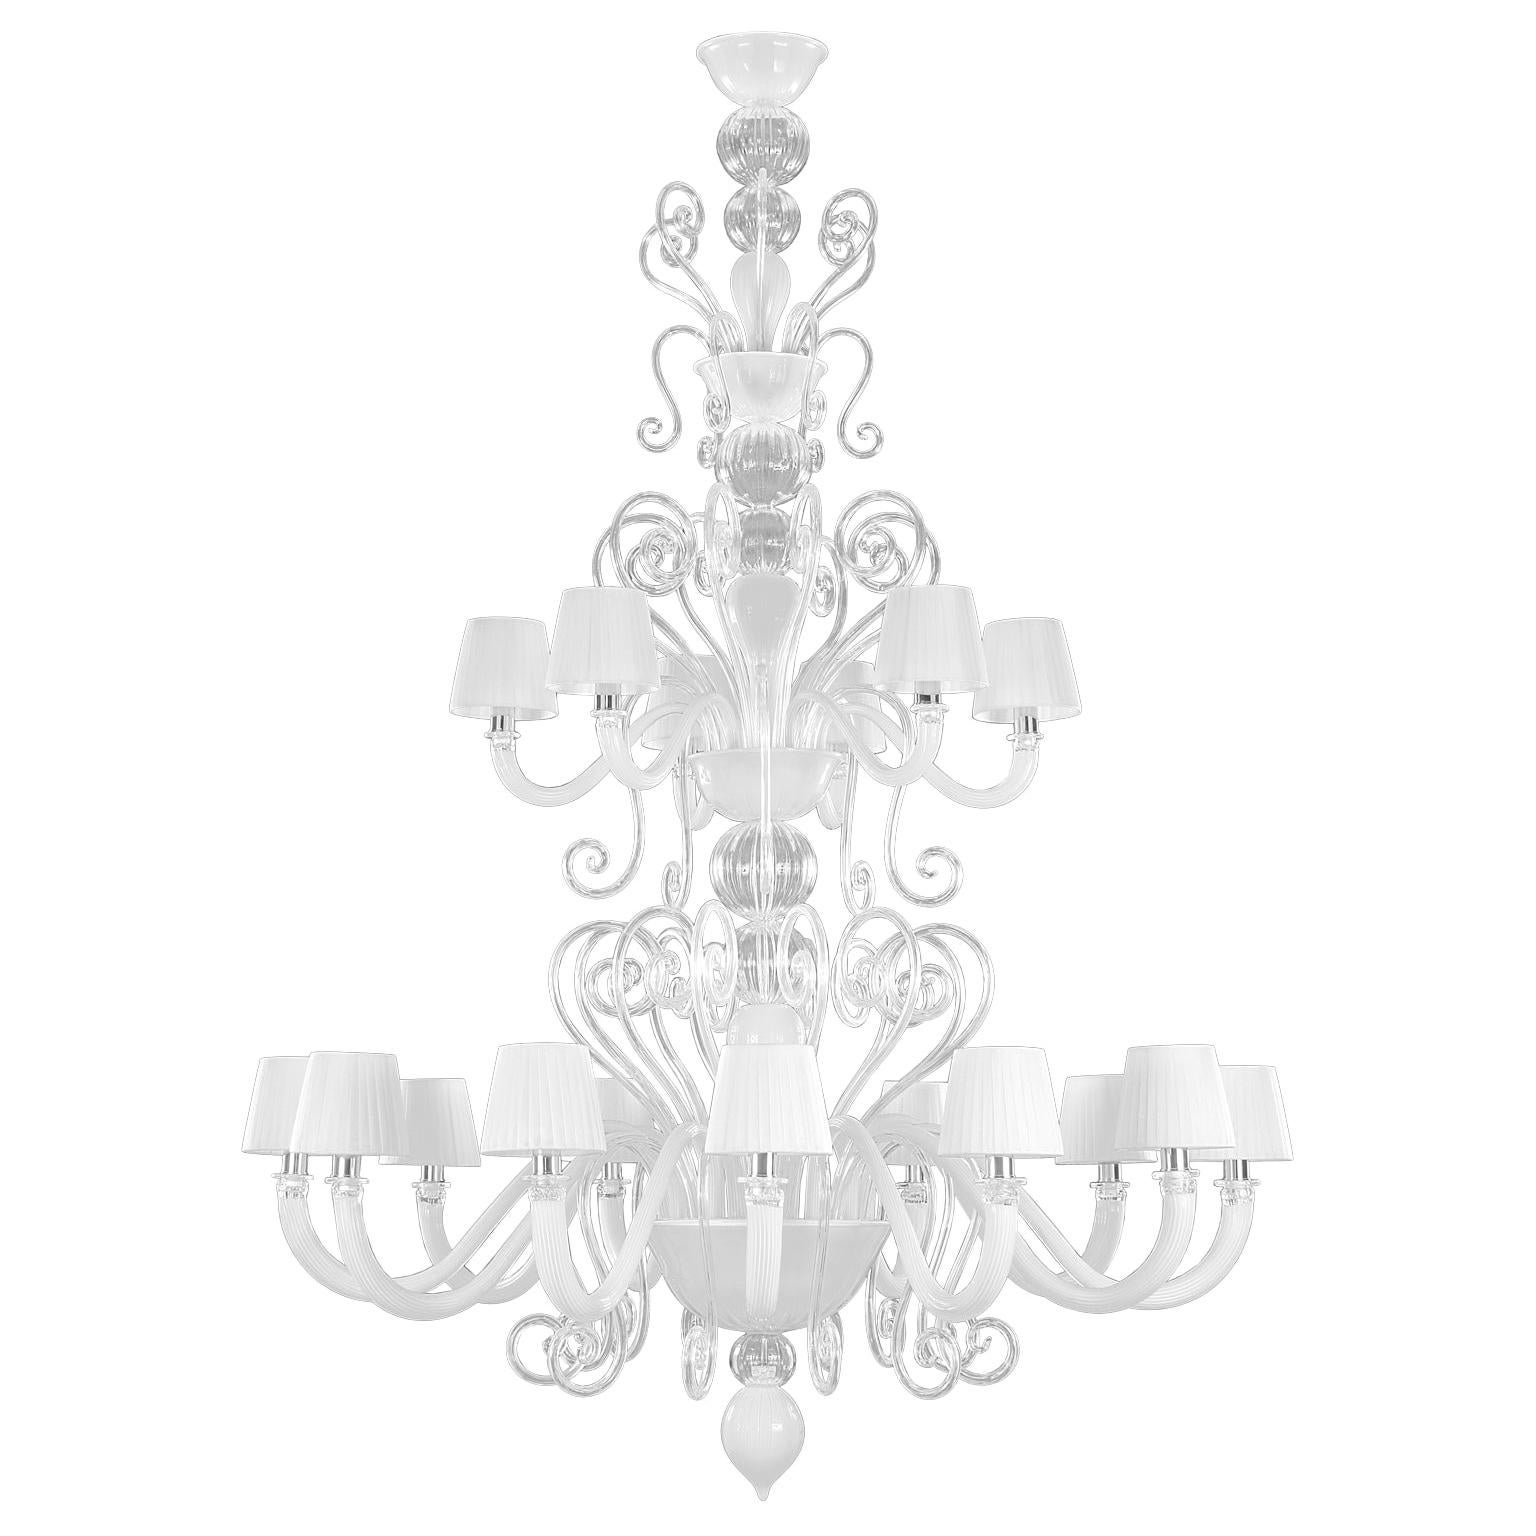 Artistic Chandelier 12+6 arms White Crystal Murano Glass Gatsby by Multiforme For Sale